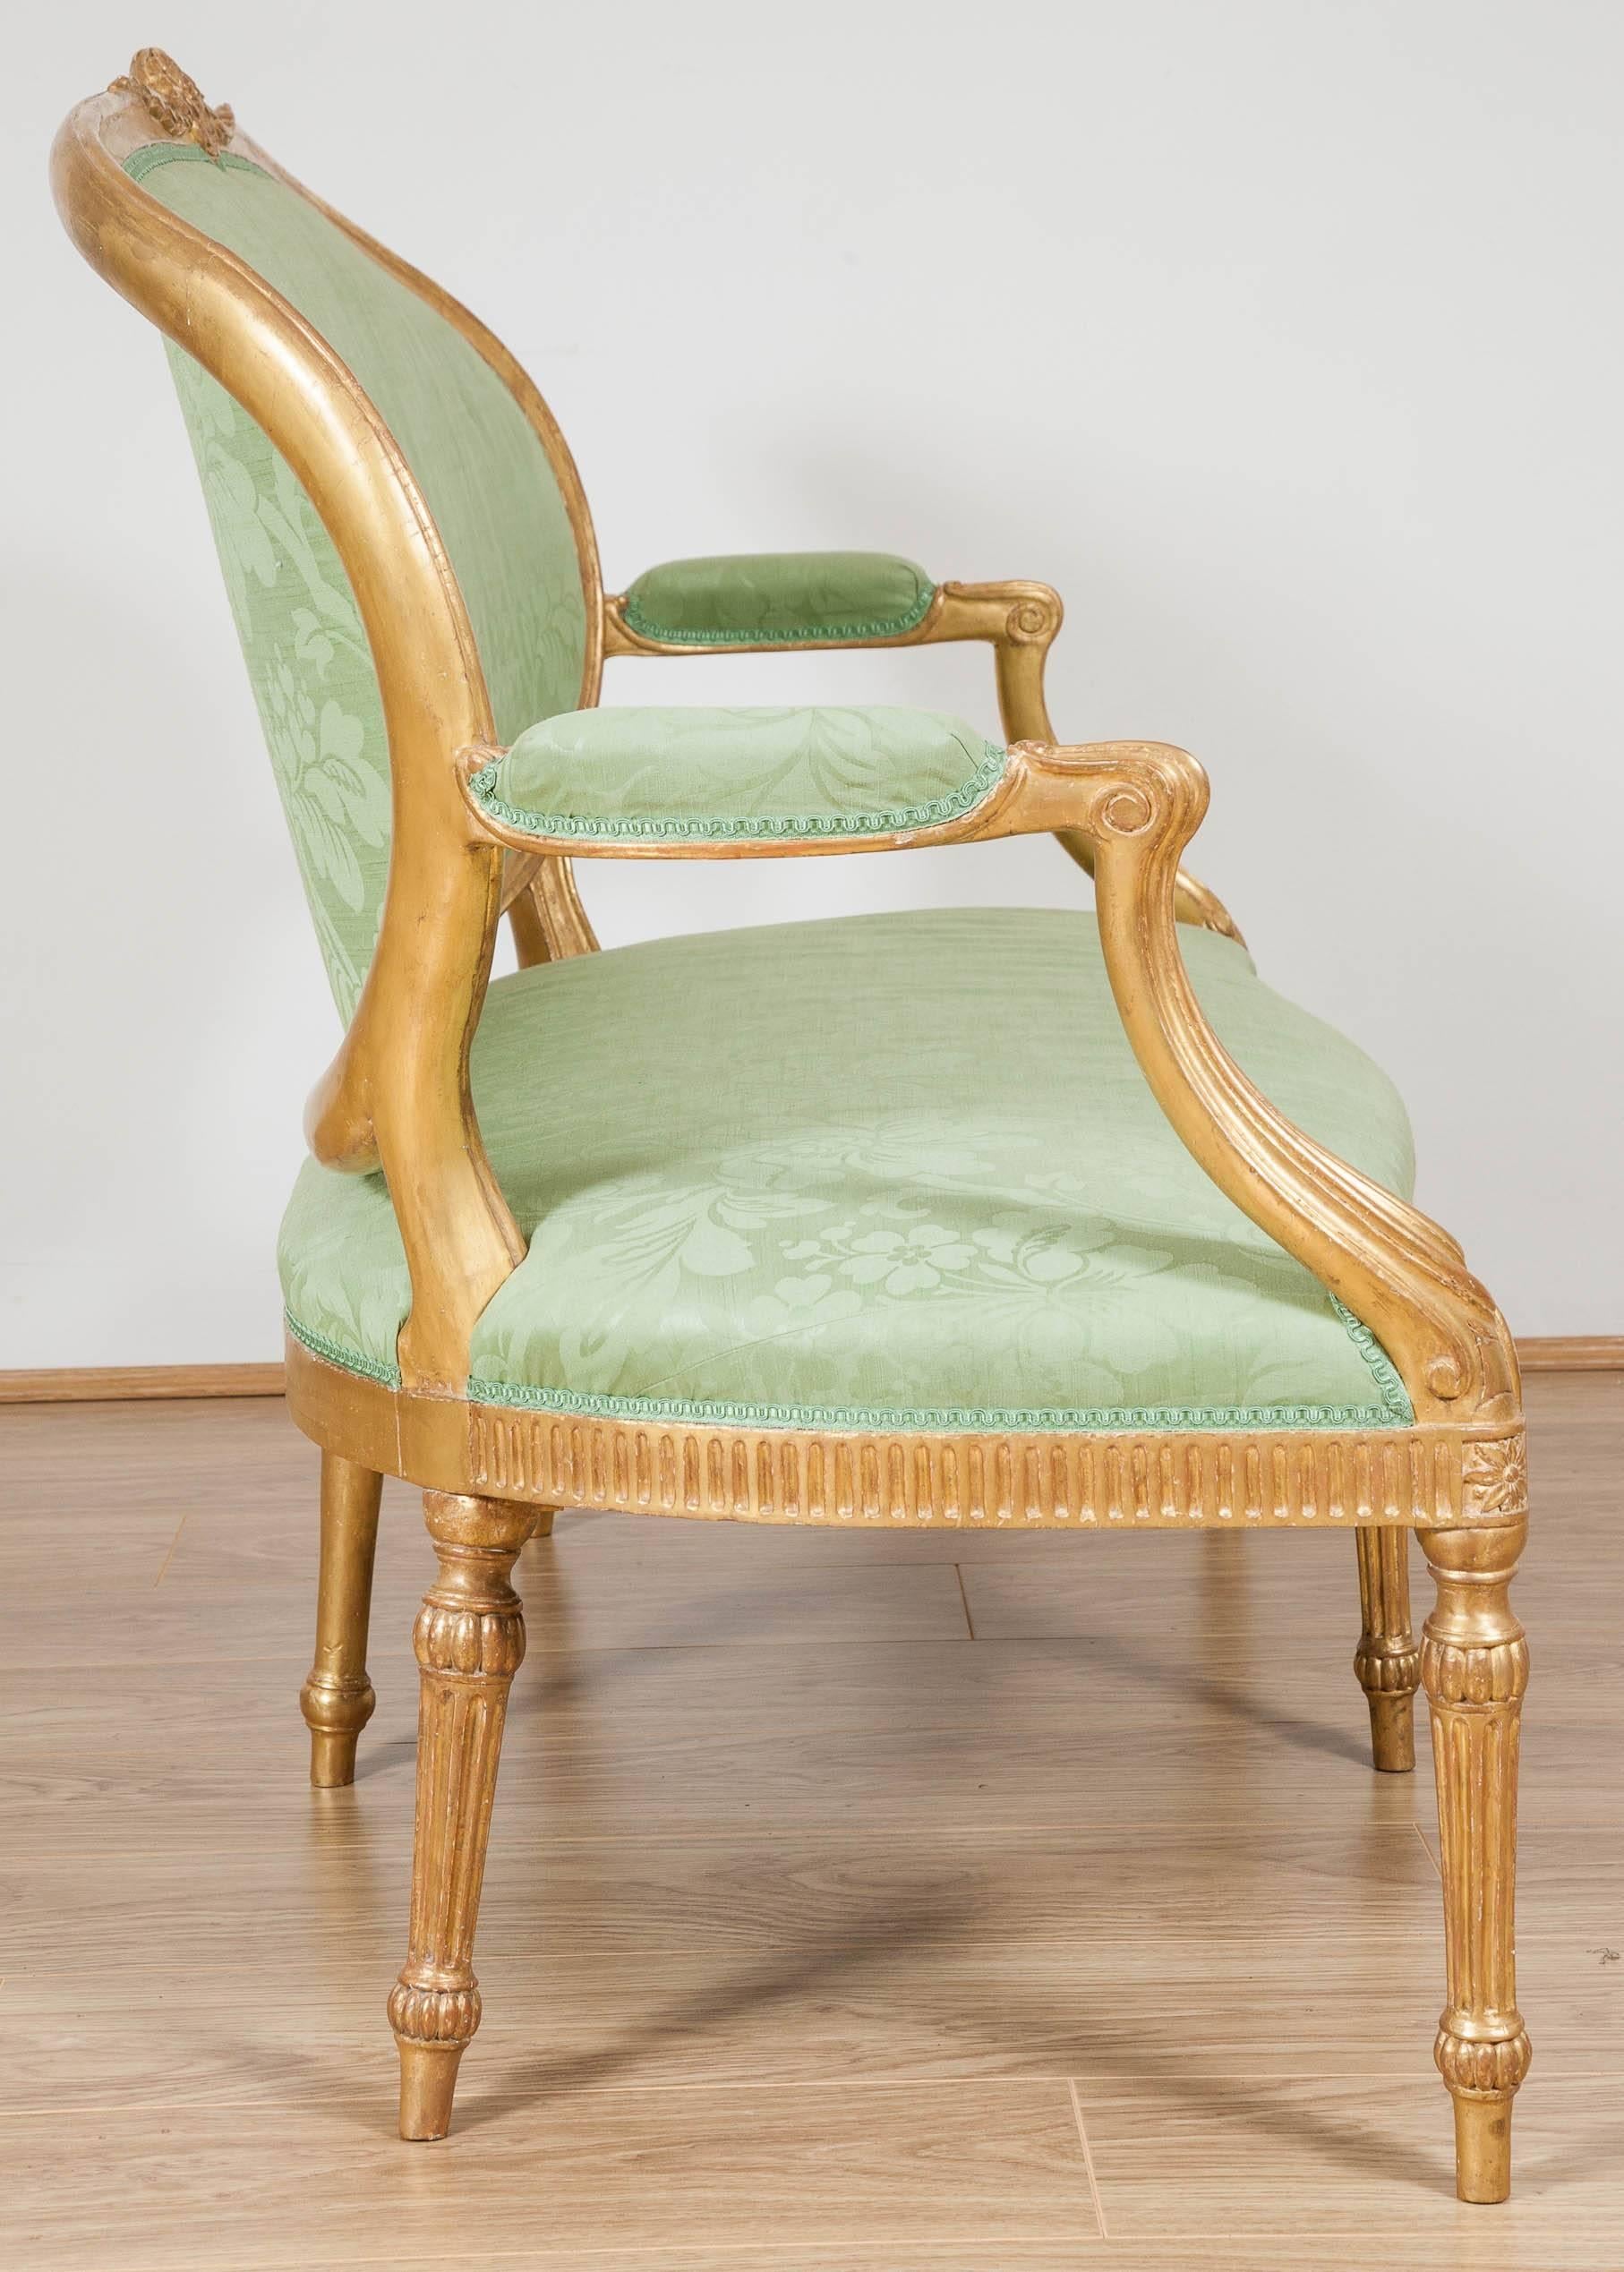 Pair of Carved Giltwood Settees, 18th Century Attributable to Thomas Chippendale For Sale 1